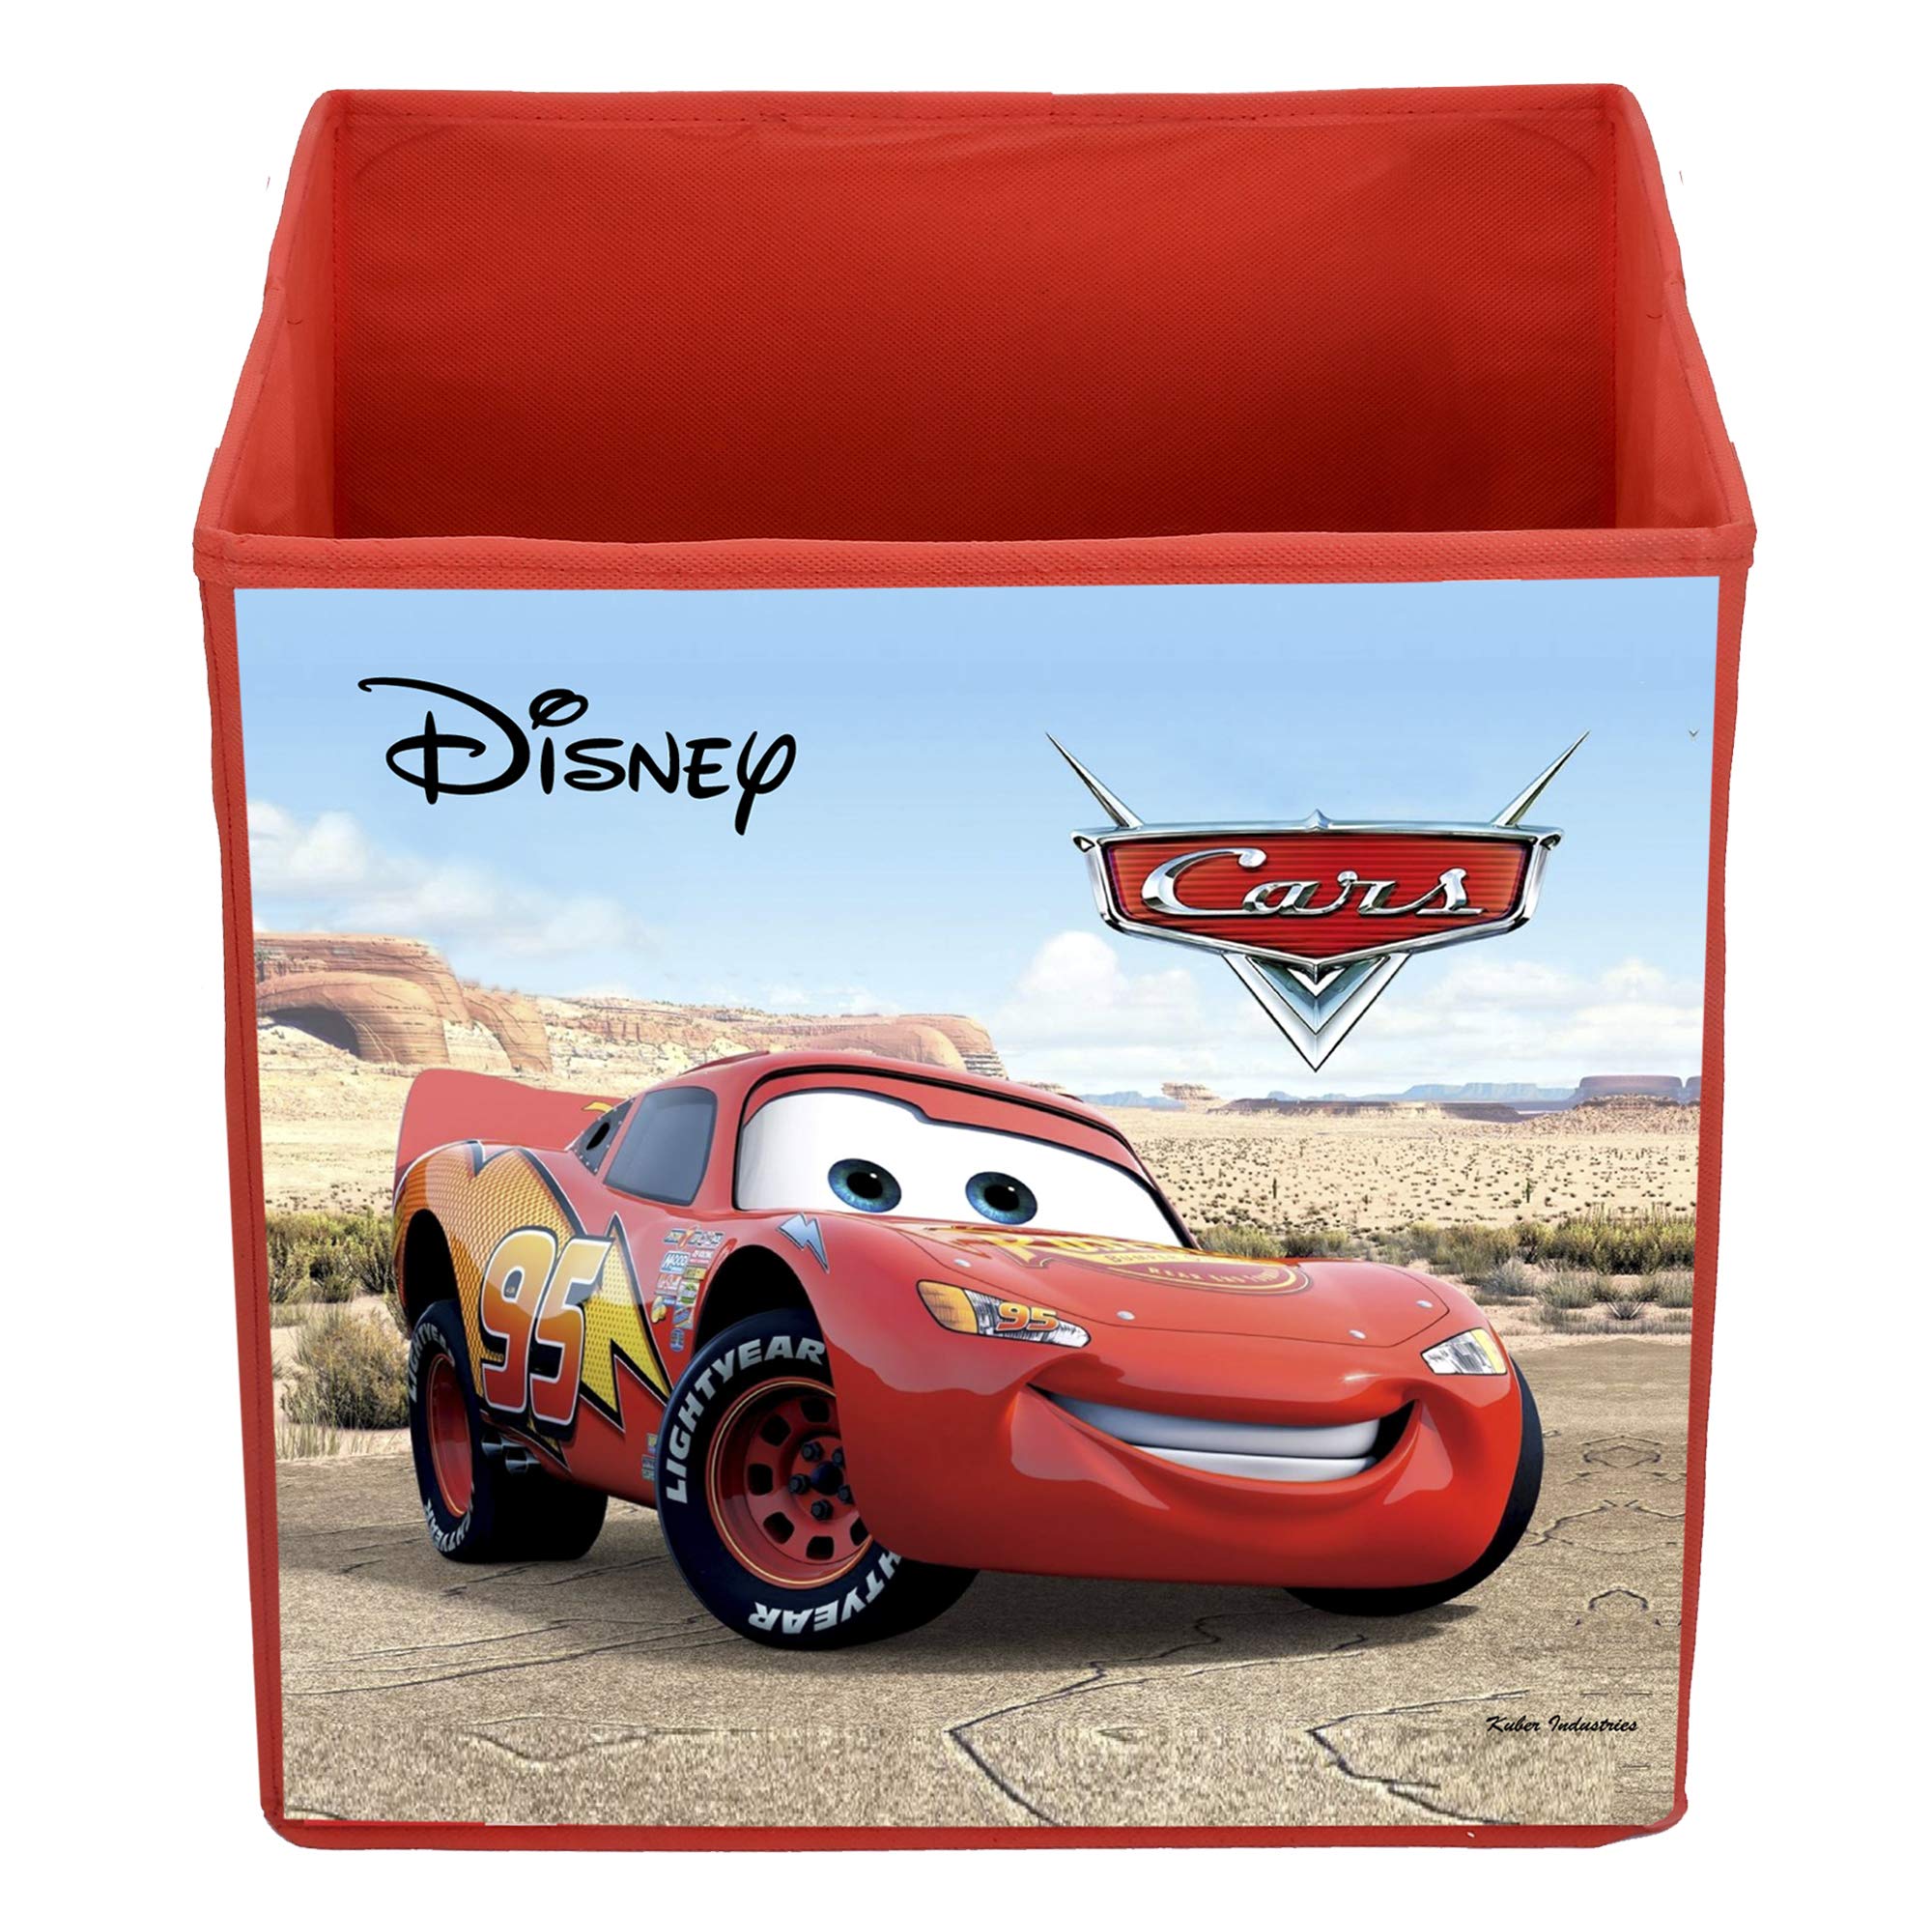 Kuber Industries Disney Cars Print Non Woven Fabric Foldable Cube Toy, Books, Cloth Storage Box Wardrobe Organiser with Handle (Brown, Large, 2 Pieces KUBMART02326)